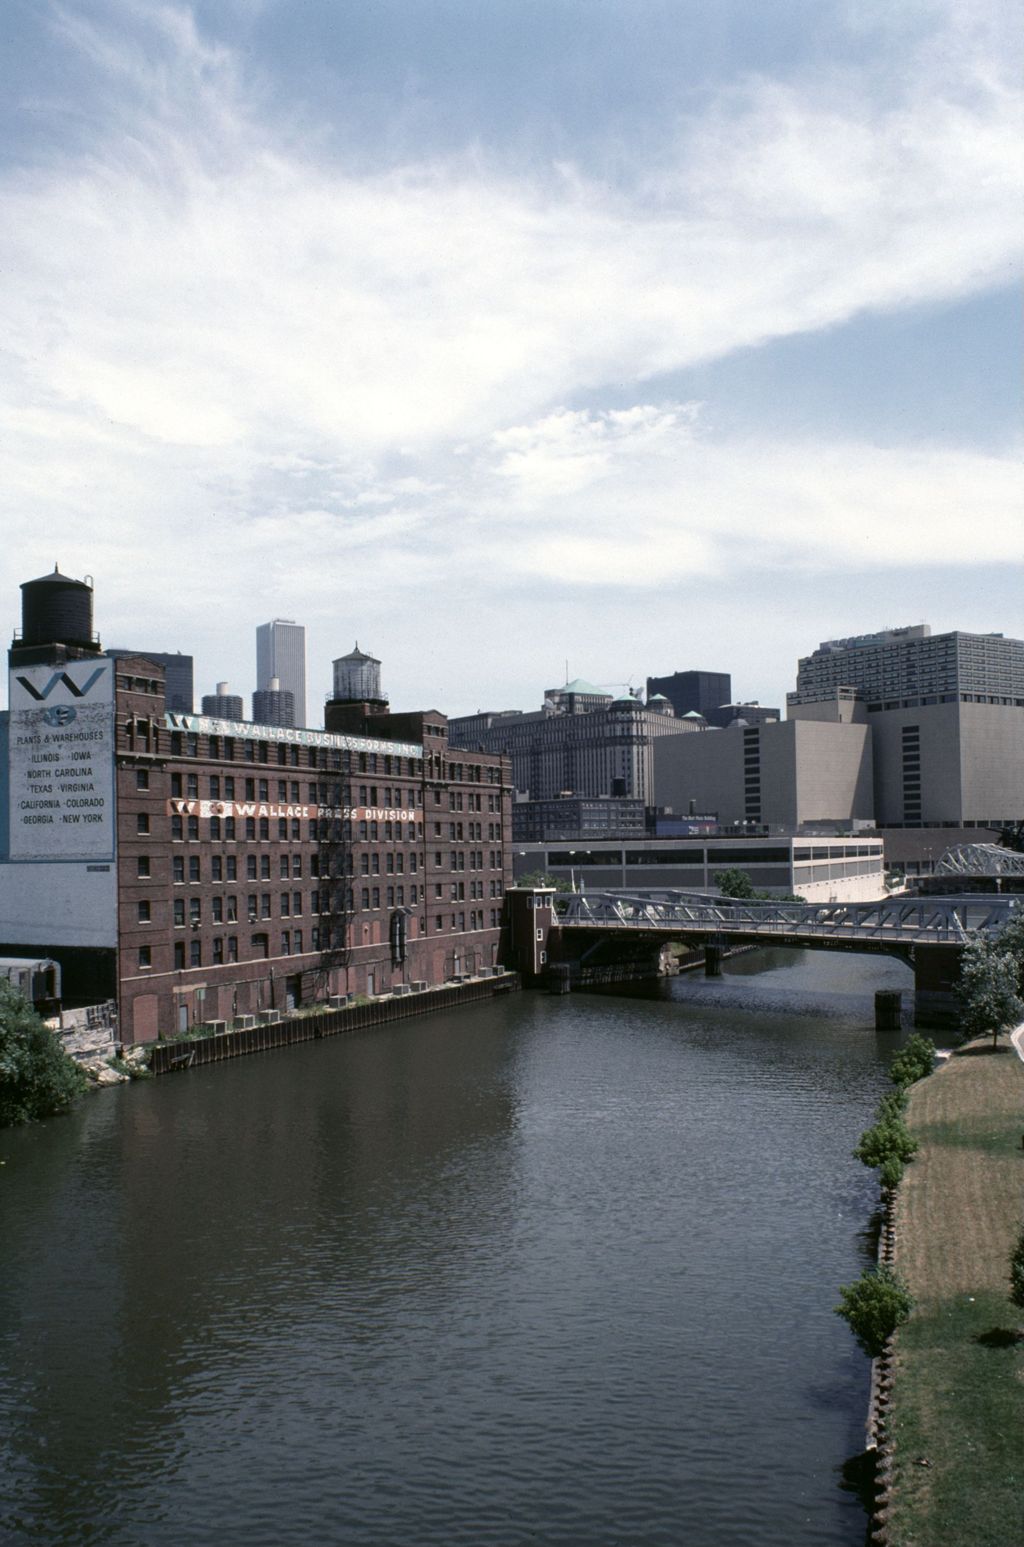 Wallace Press Building and Chicago River